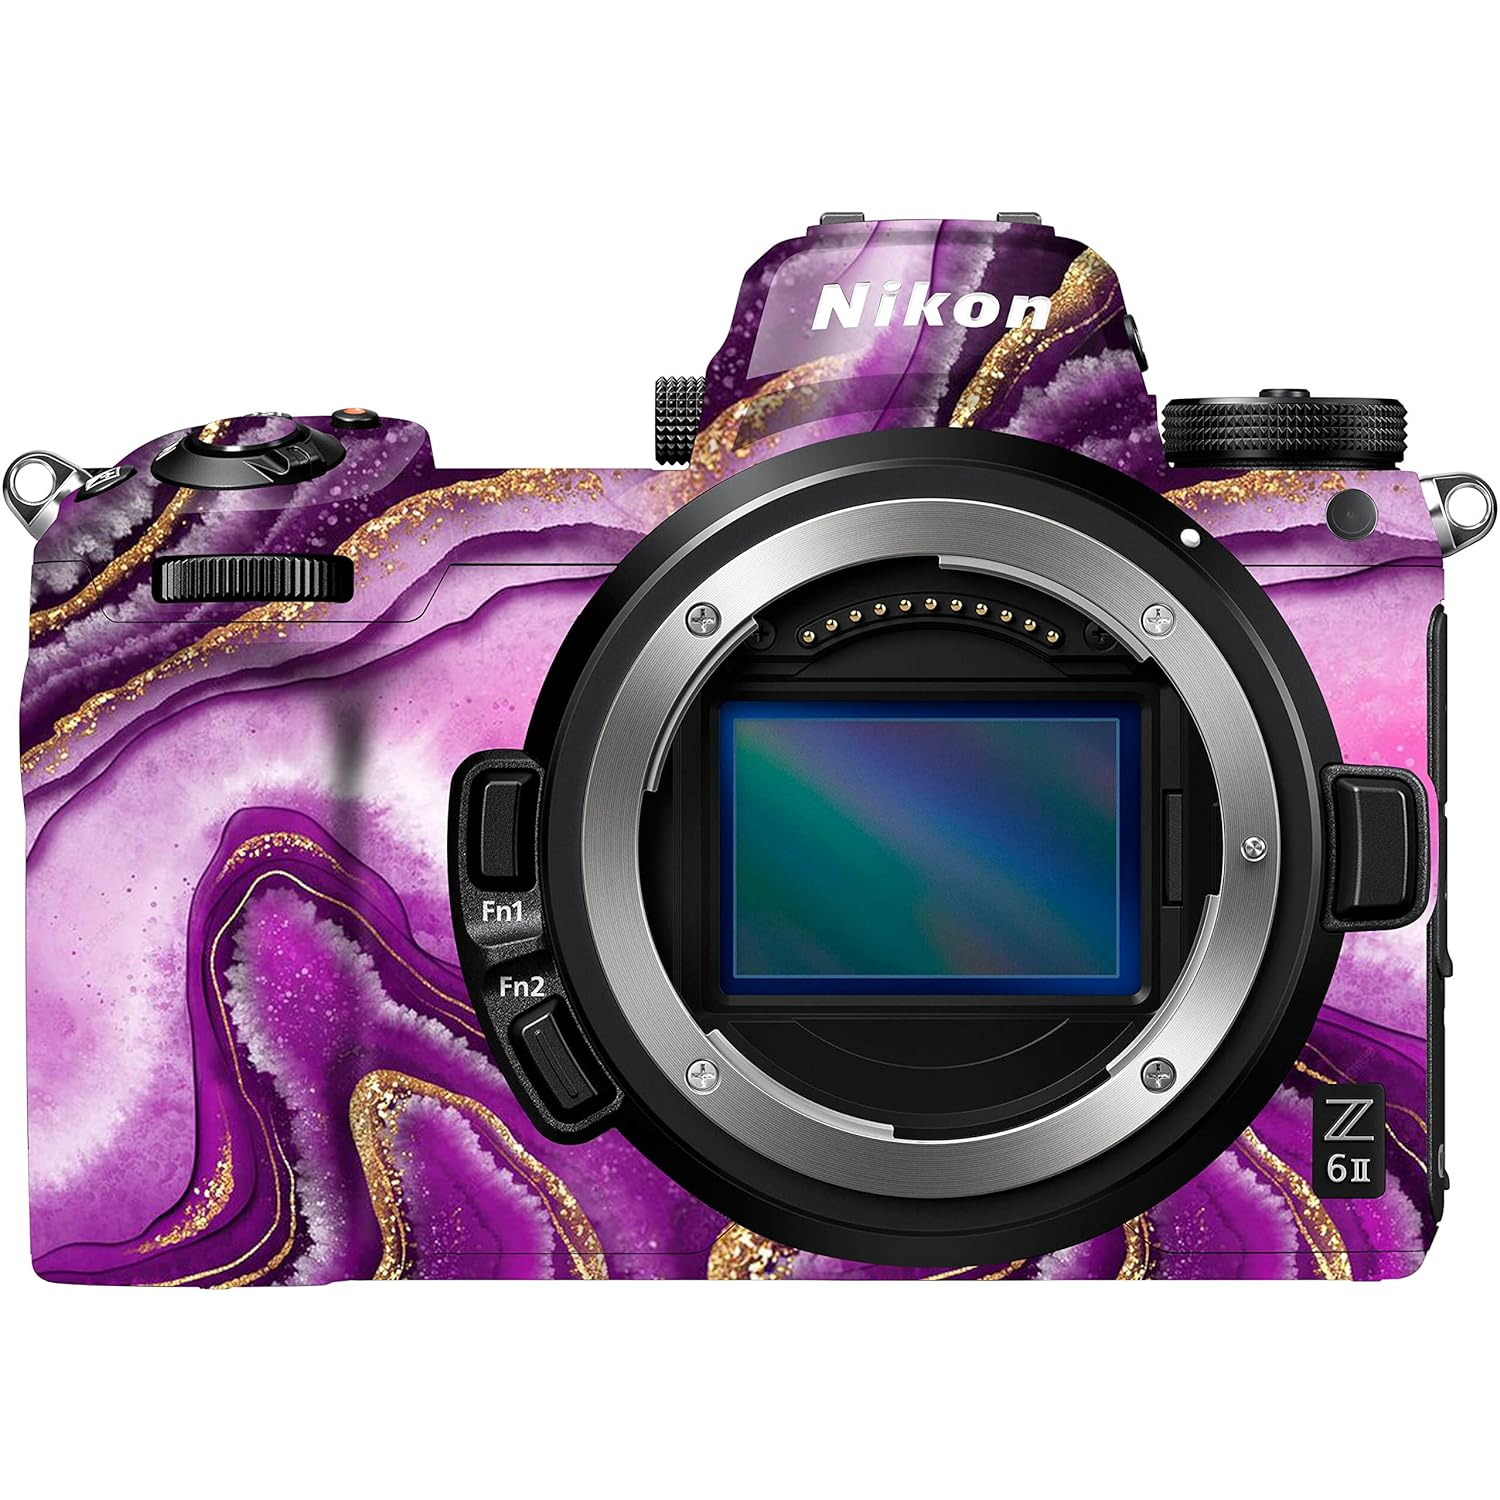 Read more about the article WRAPTURE. Premium DSLR Camera Scratchproof Protective Skin for Nikon Z6 ii – No Residue Removal, Bubble Free, Scratch Resistant, Stretchable, HD Quality Printed – HDCS 008